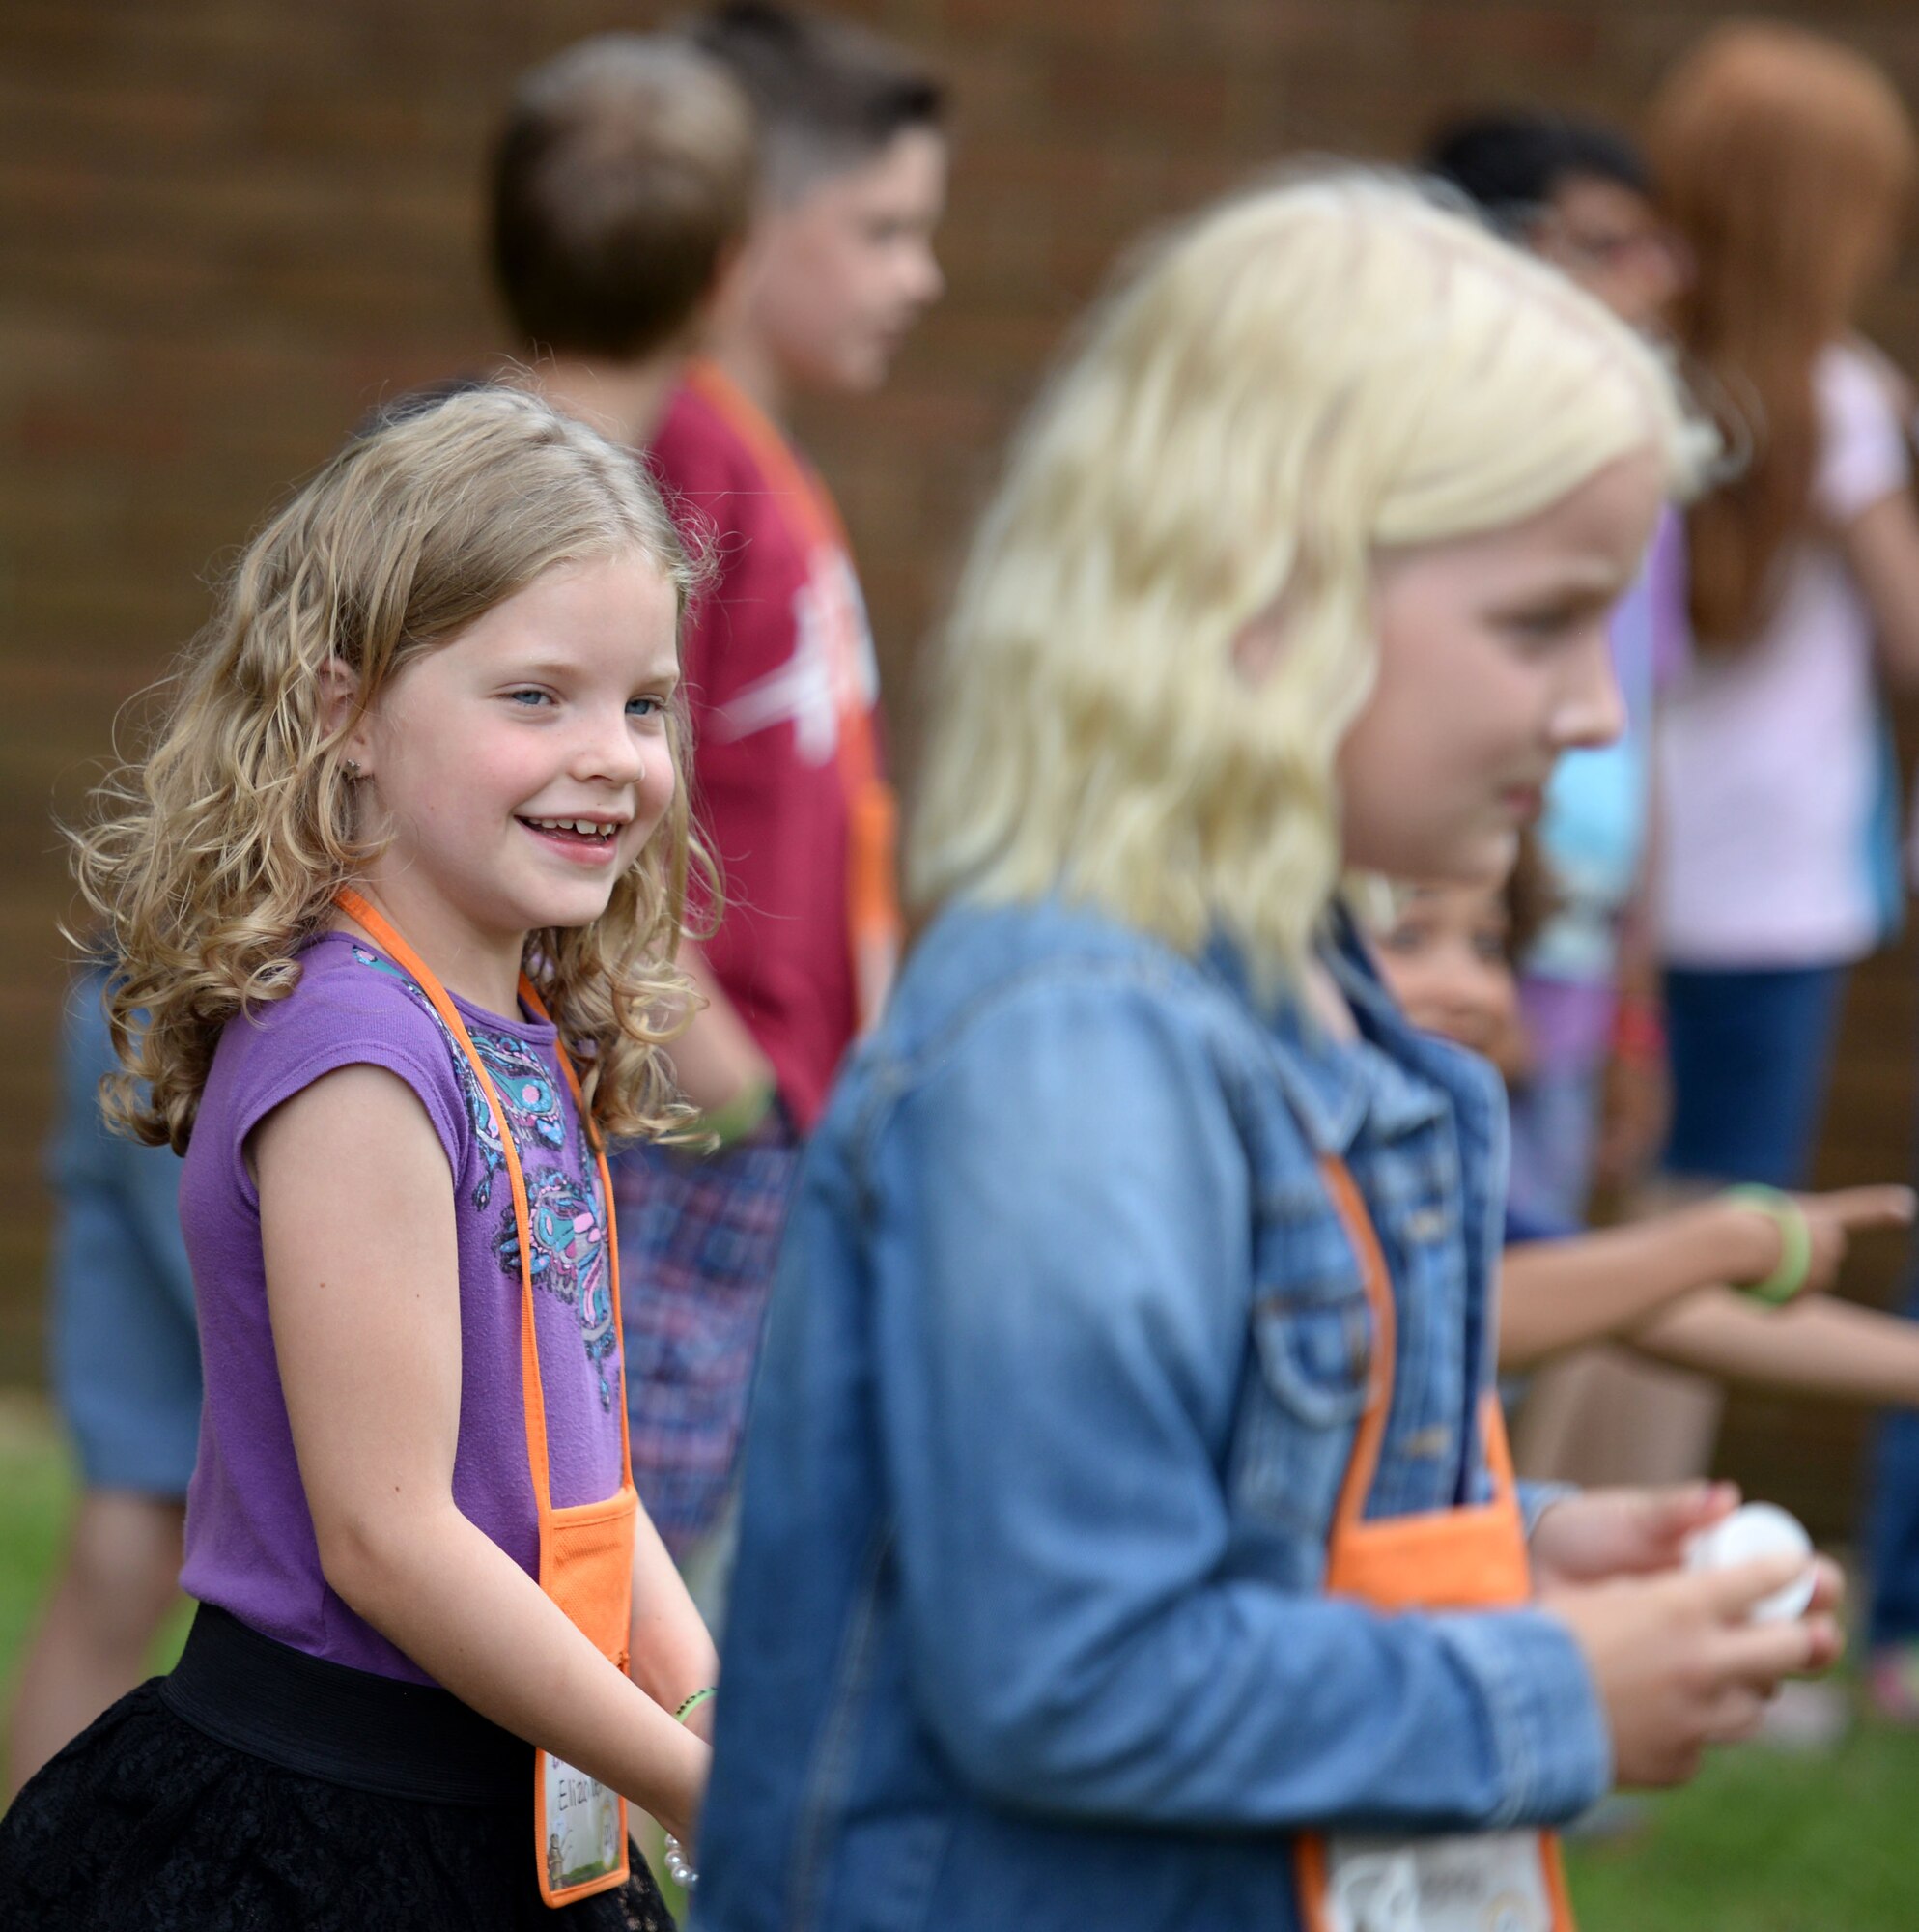 Team Mildenhall children take part in outdoor games during Vacation Bible School July 25, 2016, outside the chapel on RAF Mildenhall, England. This annual event educates children so they can build stronger spiritual foundations. (U.S. Air Force photo by Gina Randall)